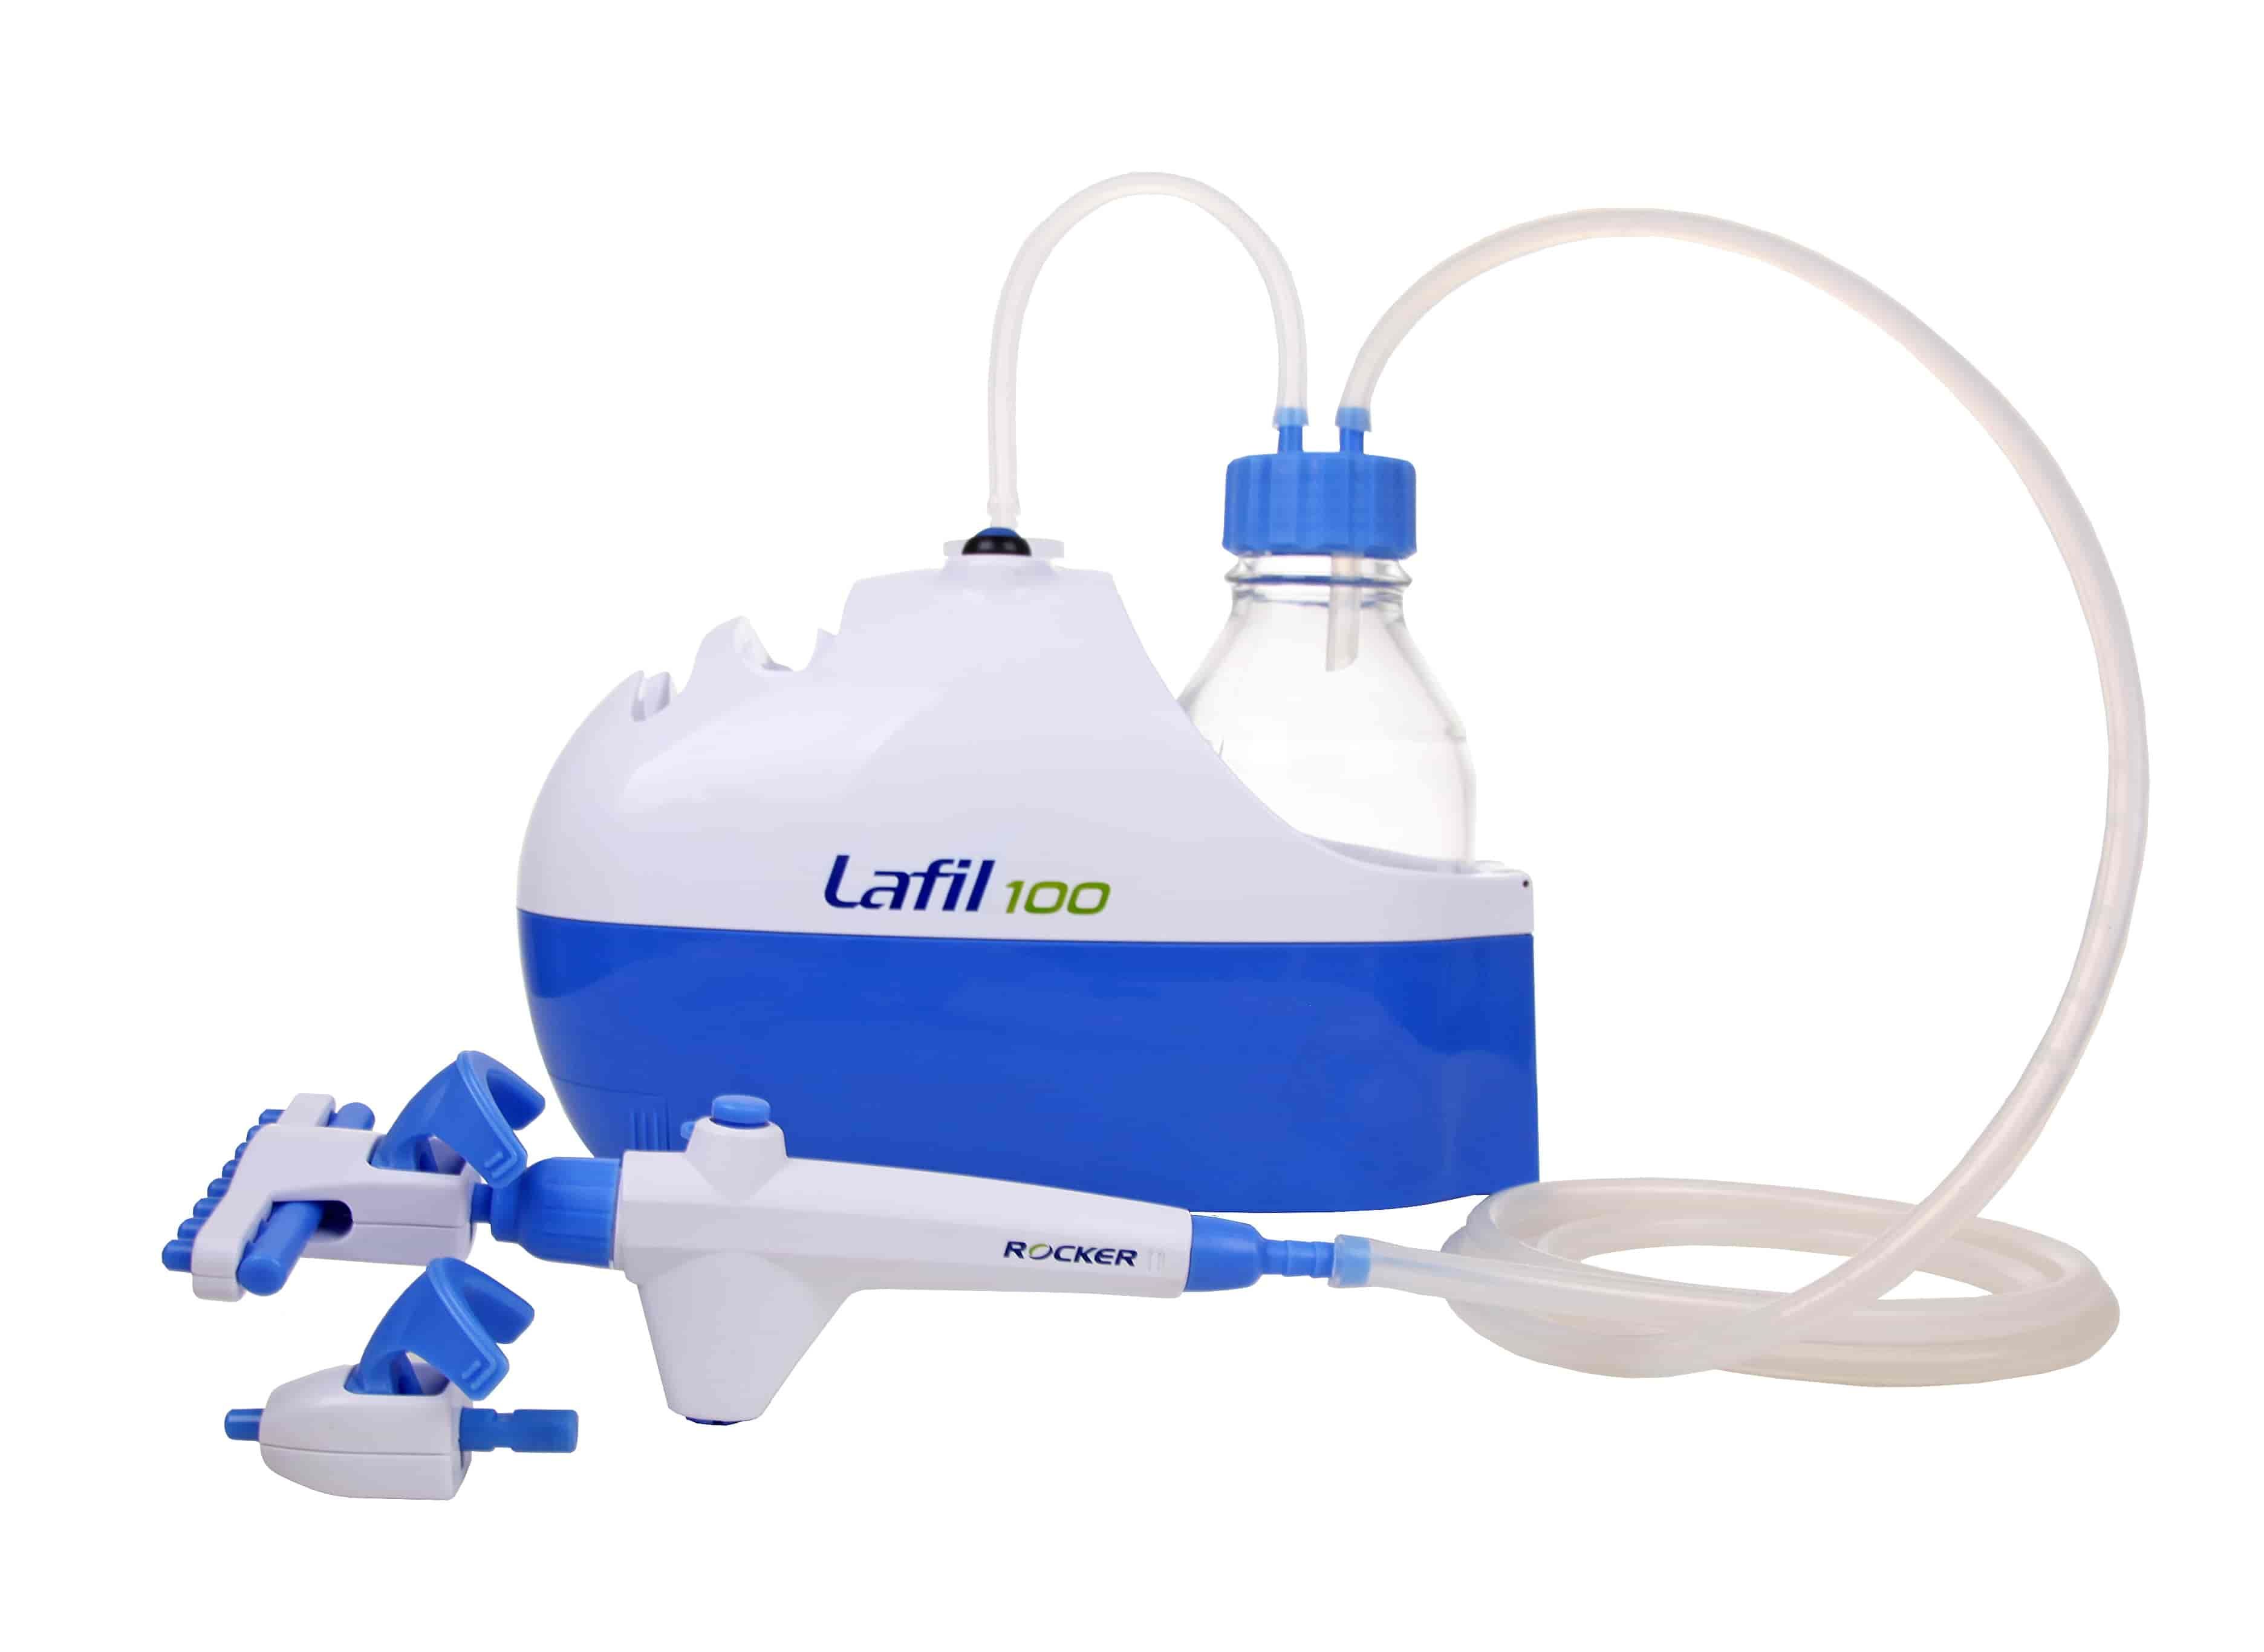 Get New Lafil Vacuum Suction Systems At Sterlitech